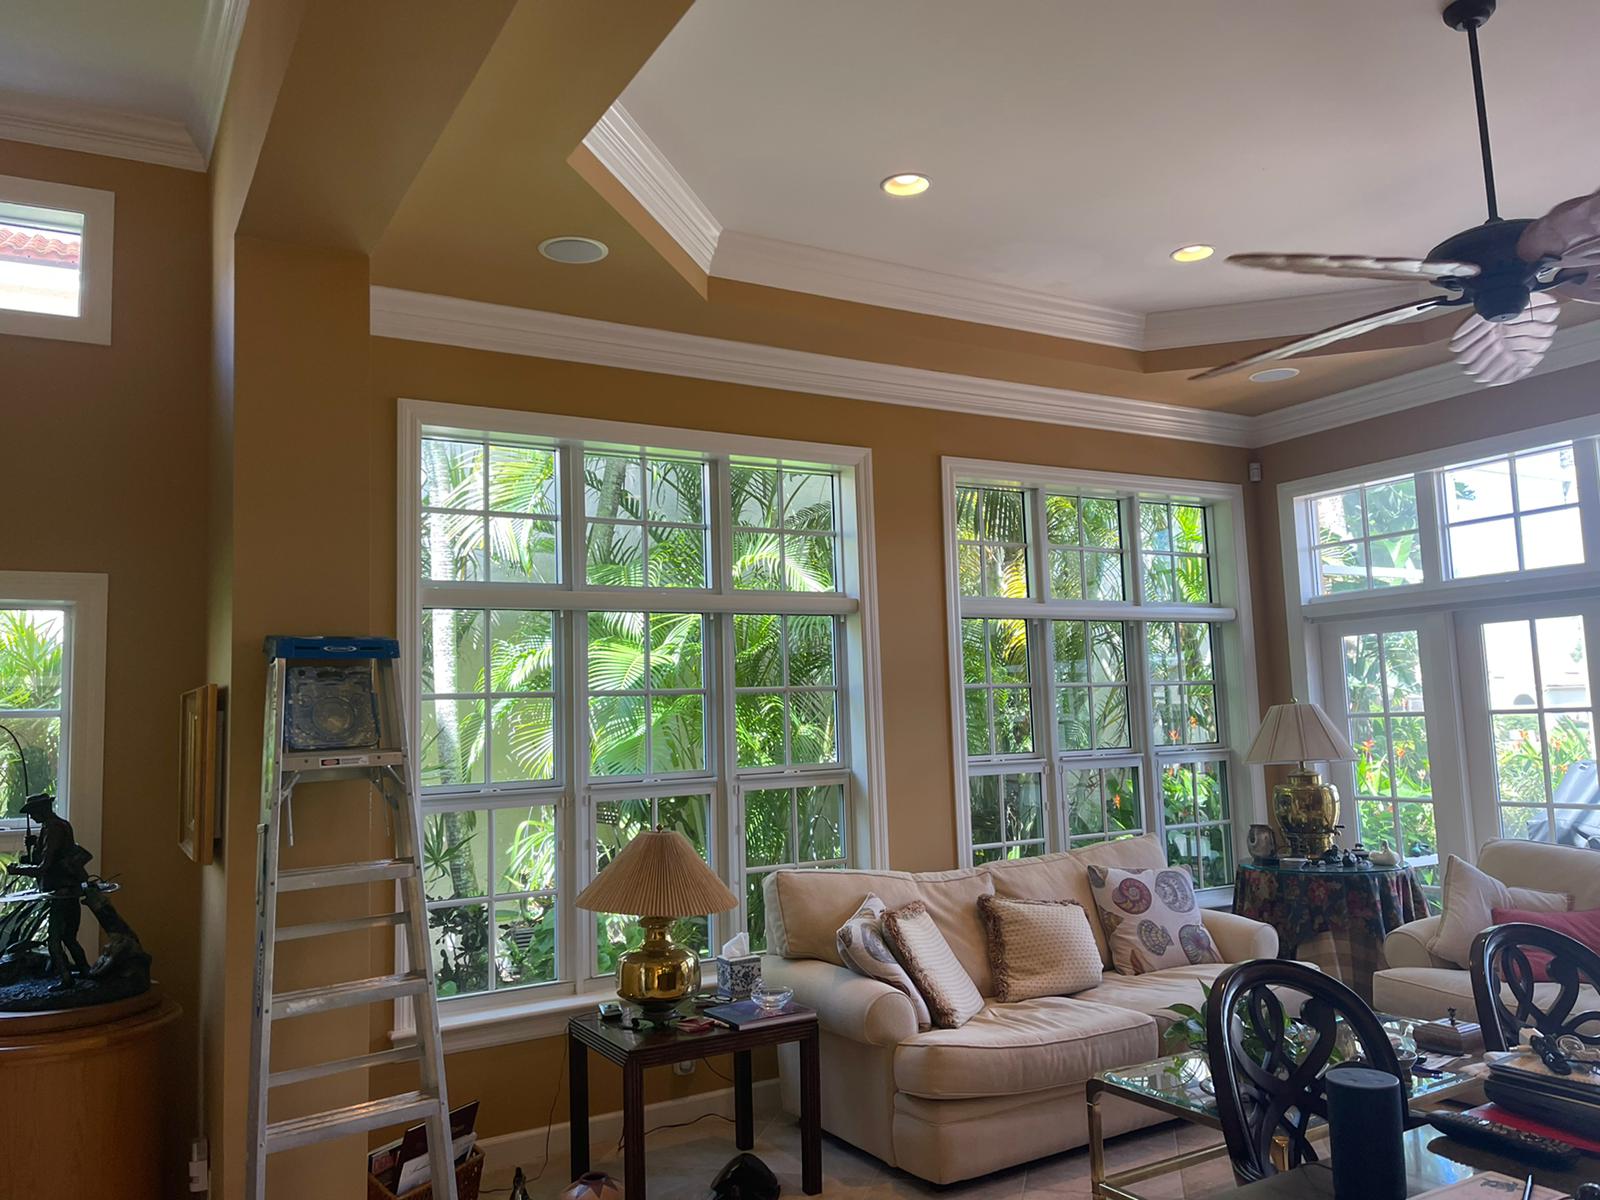 House Painting Services Baton Rouge